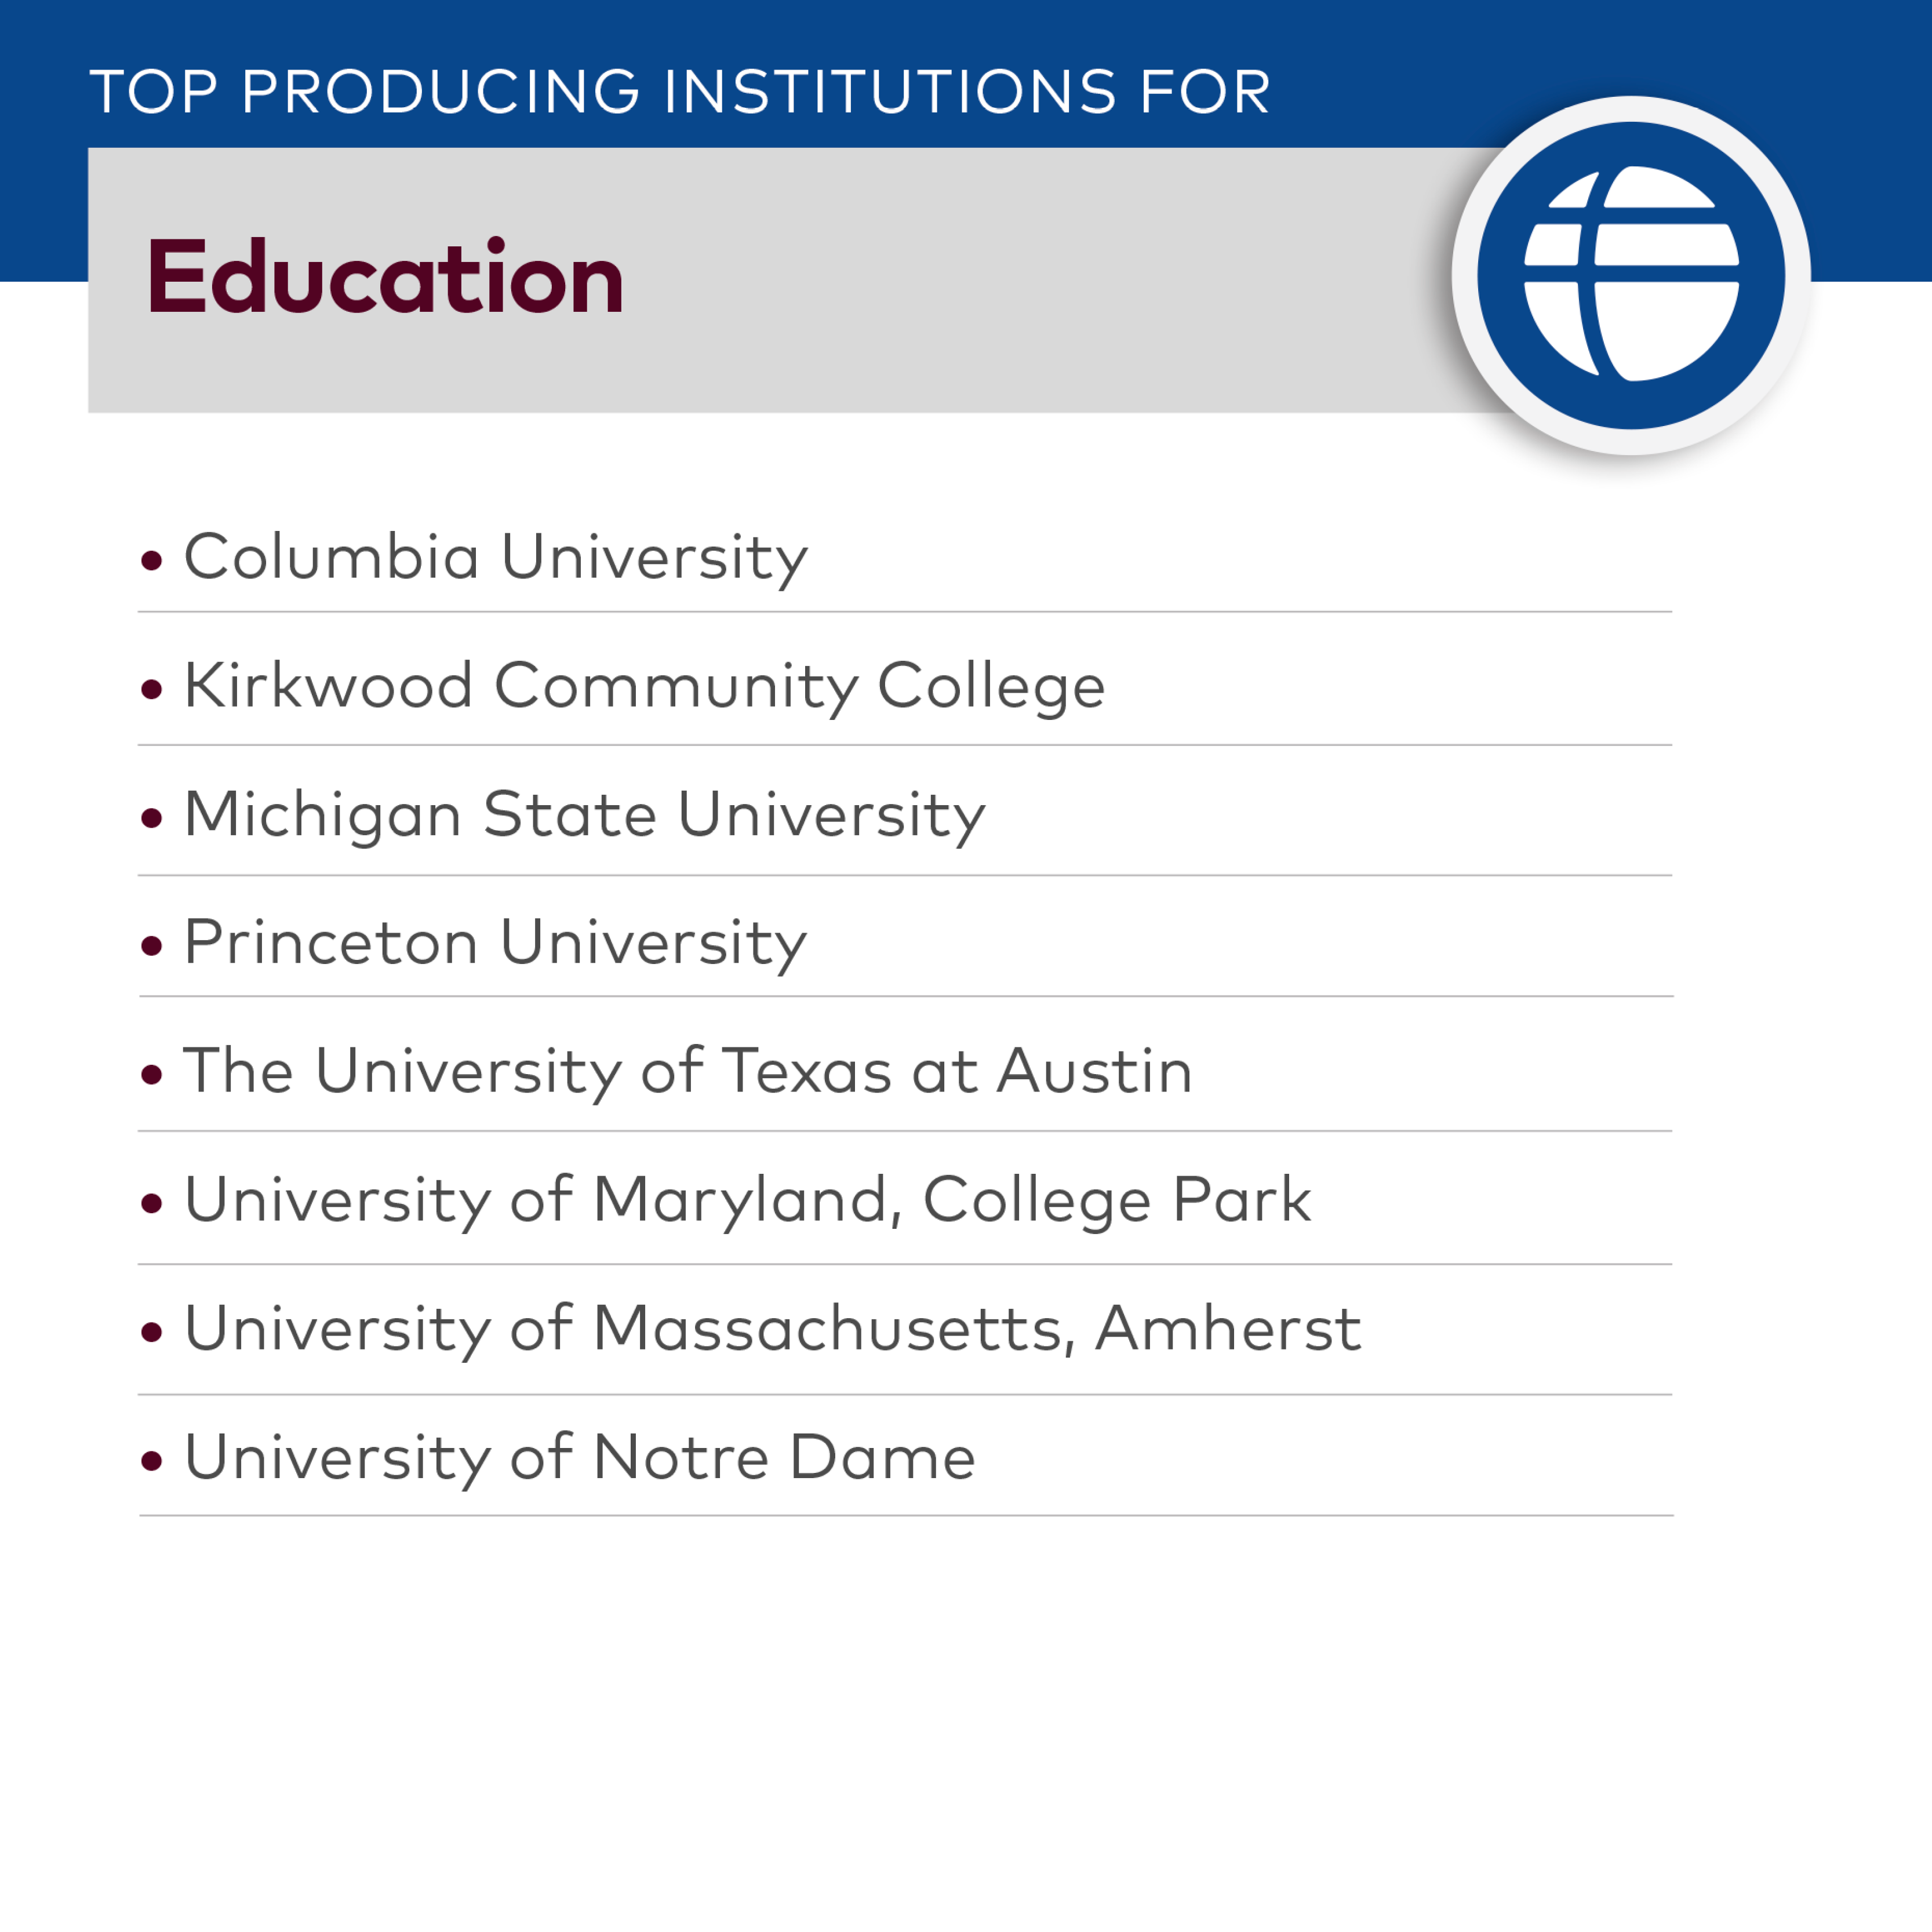 Education Top Producing Institutions: Columbia University, Kirkwood Community College, Michigan State University, Princeton University, University of Texas at Austin, University of Maryland-College Park, University of Massachusetts-Amherst, University of Notre Dame